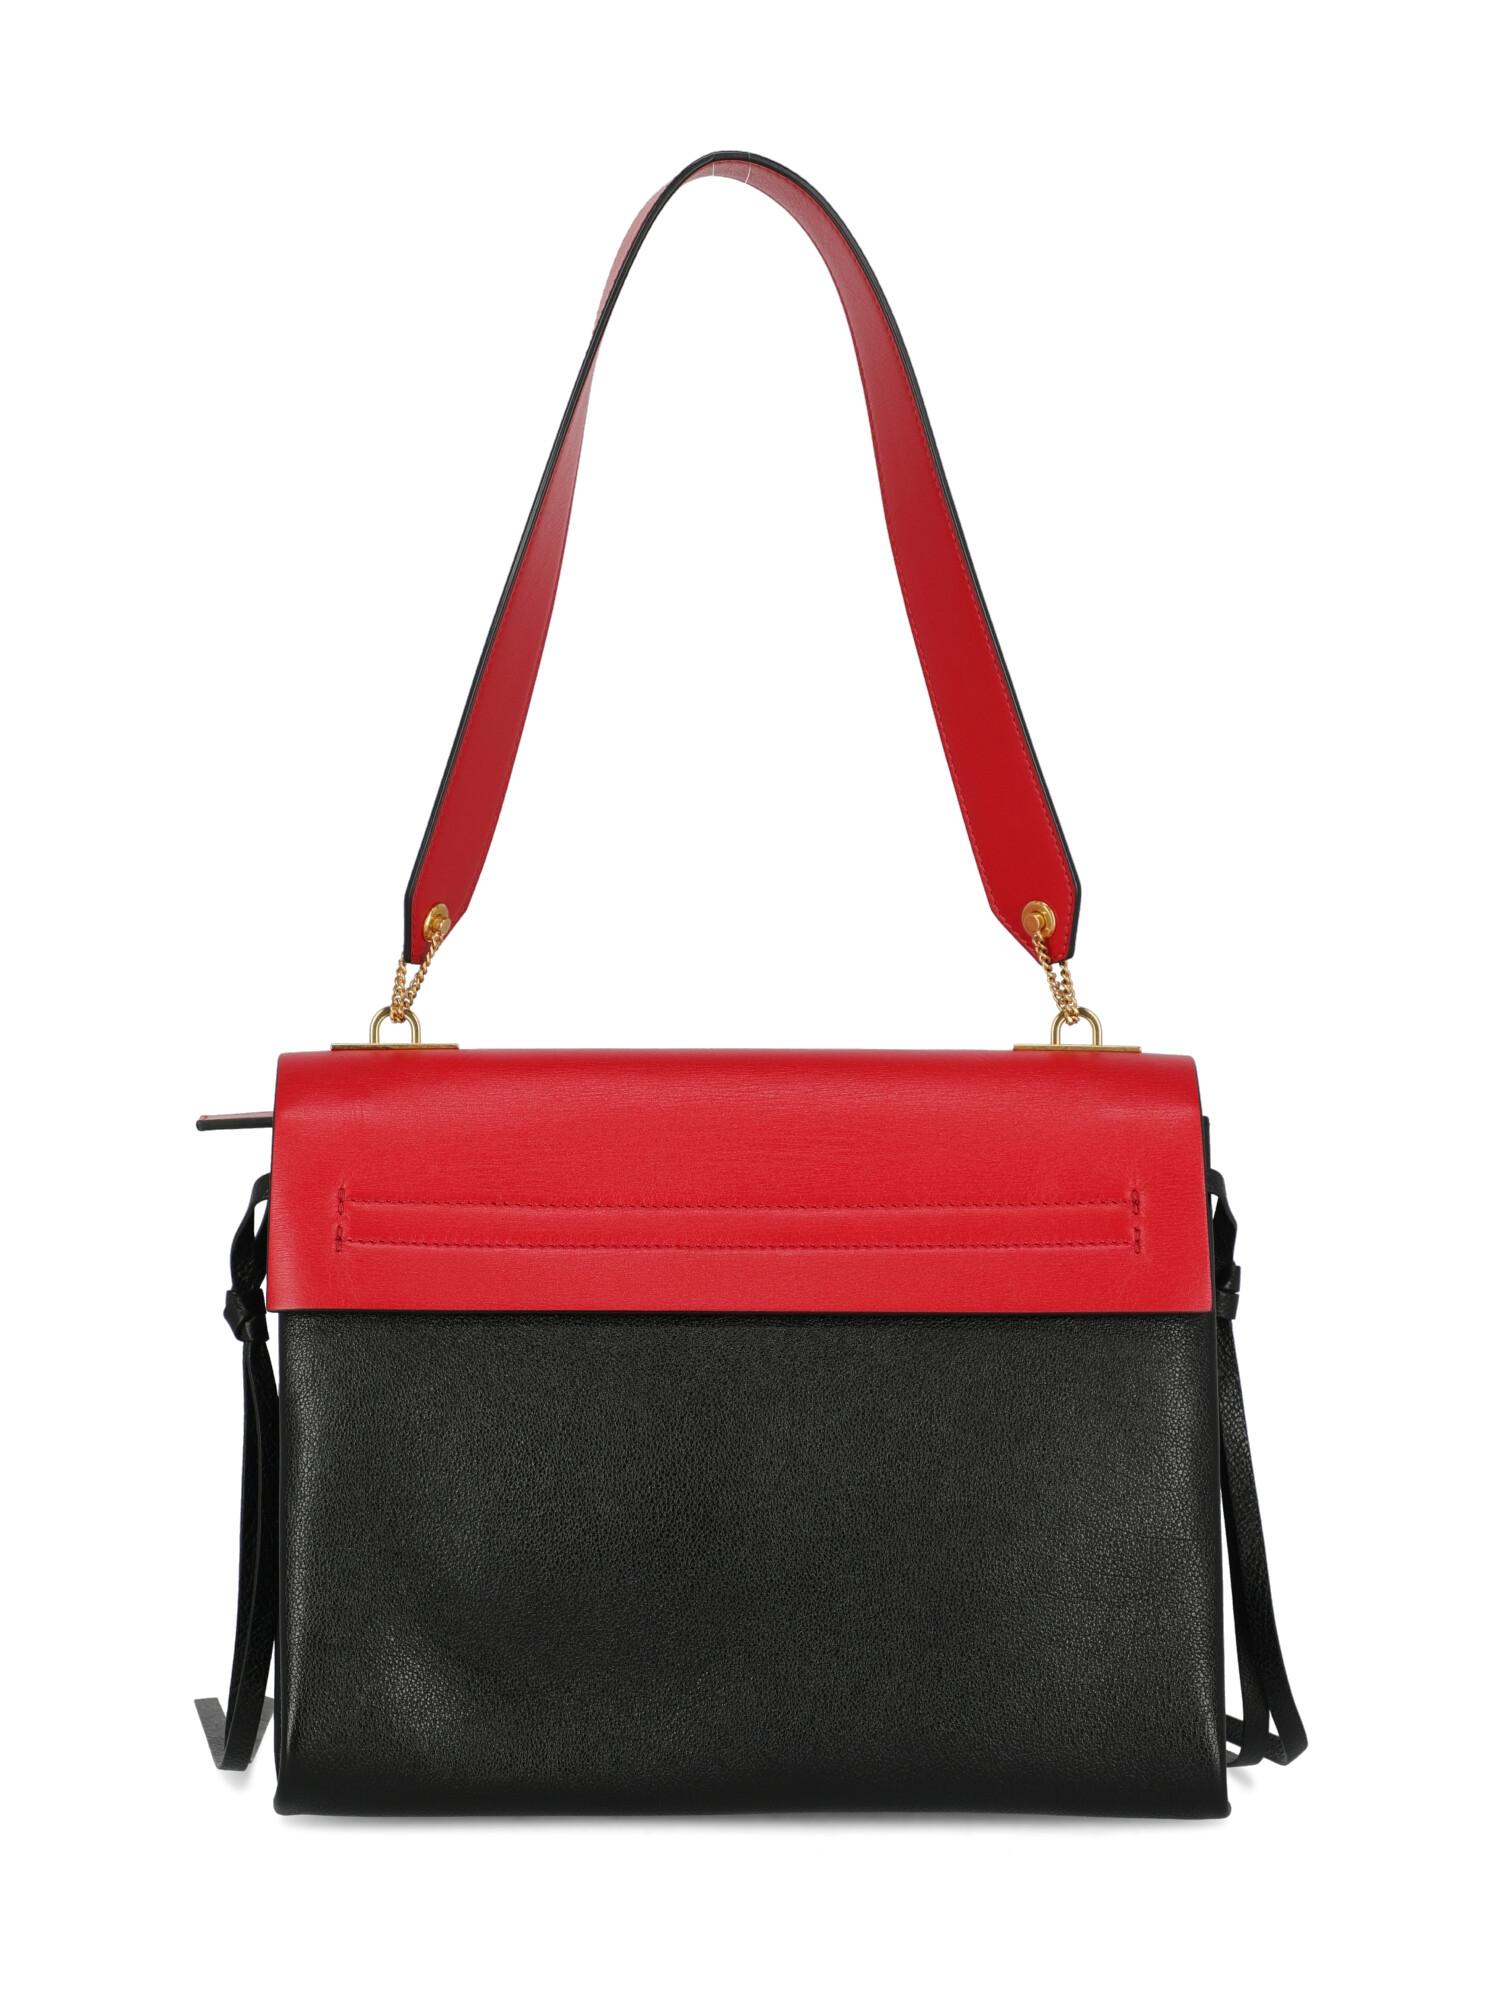 Valentino Women's Shoulder Bag V-Ring Black/Red Leather In Excellent Condition For Sale In Milan, IT